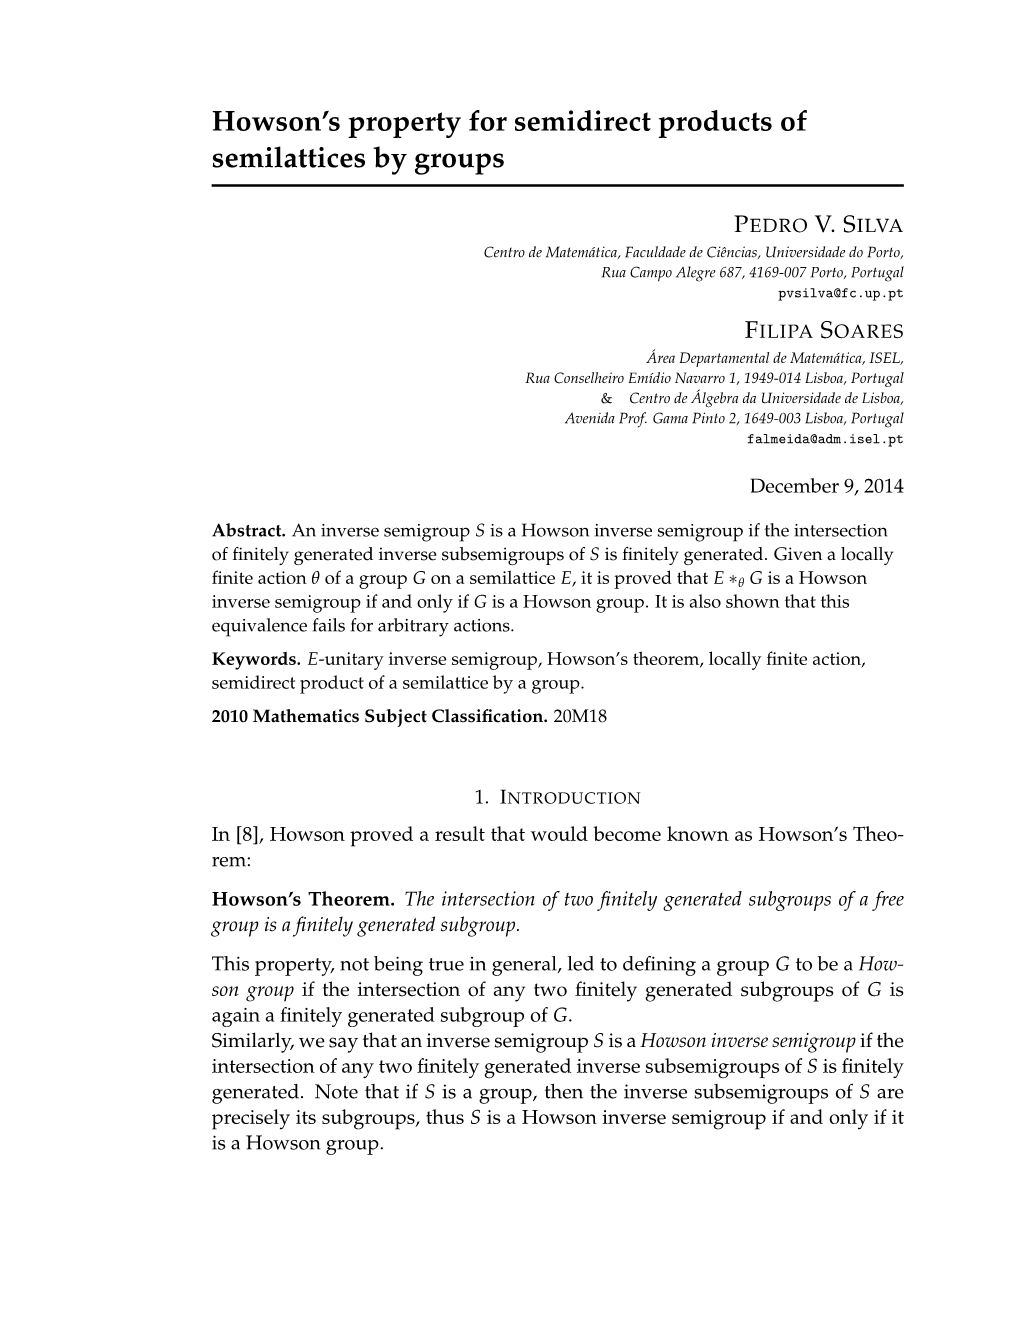 Howson's Property for Semidirect Products of Semilattices by Groups